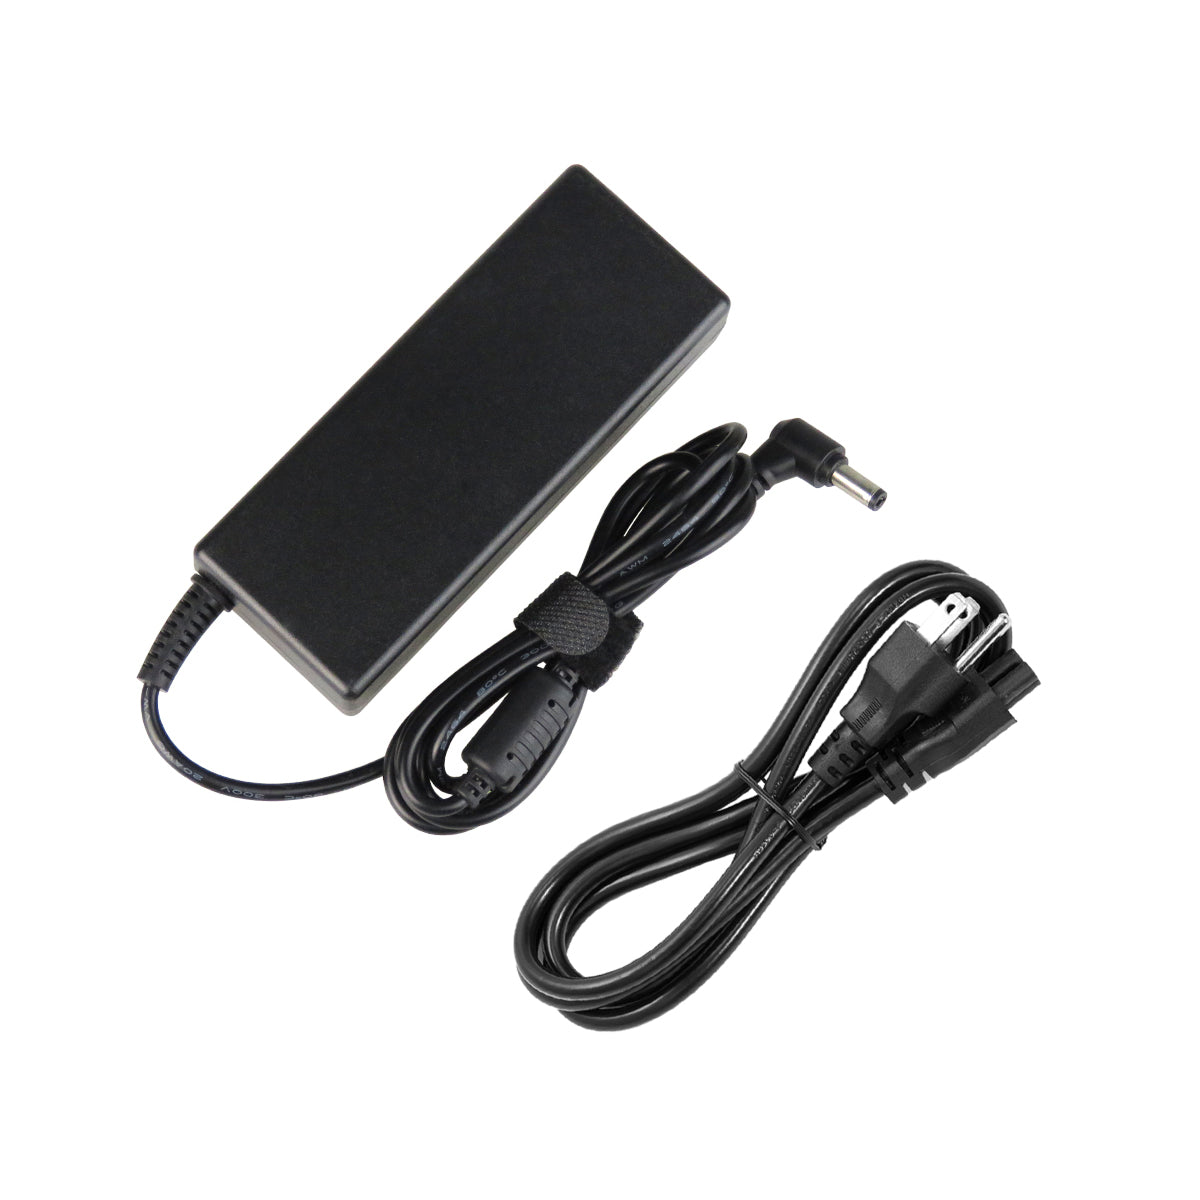 AC Adapter Charger for ASUS A43BR Notebook.